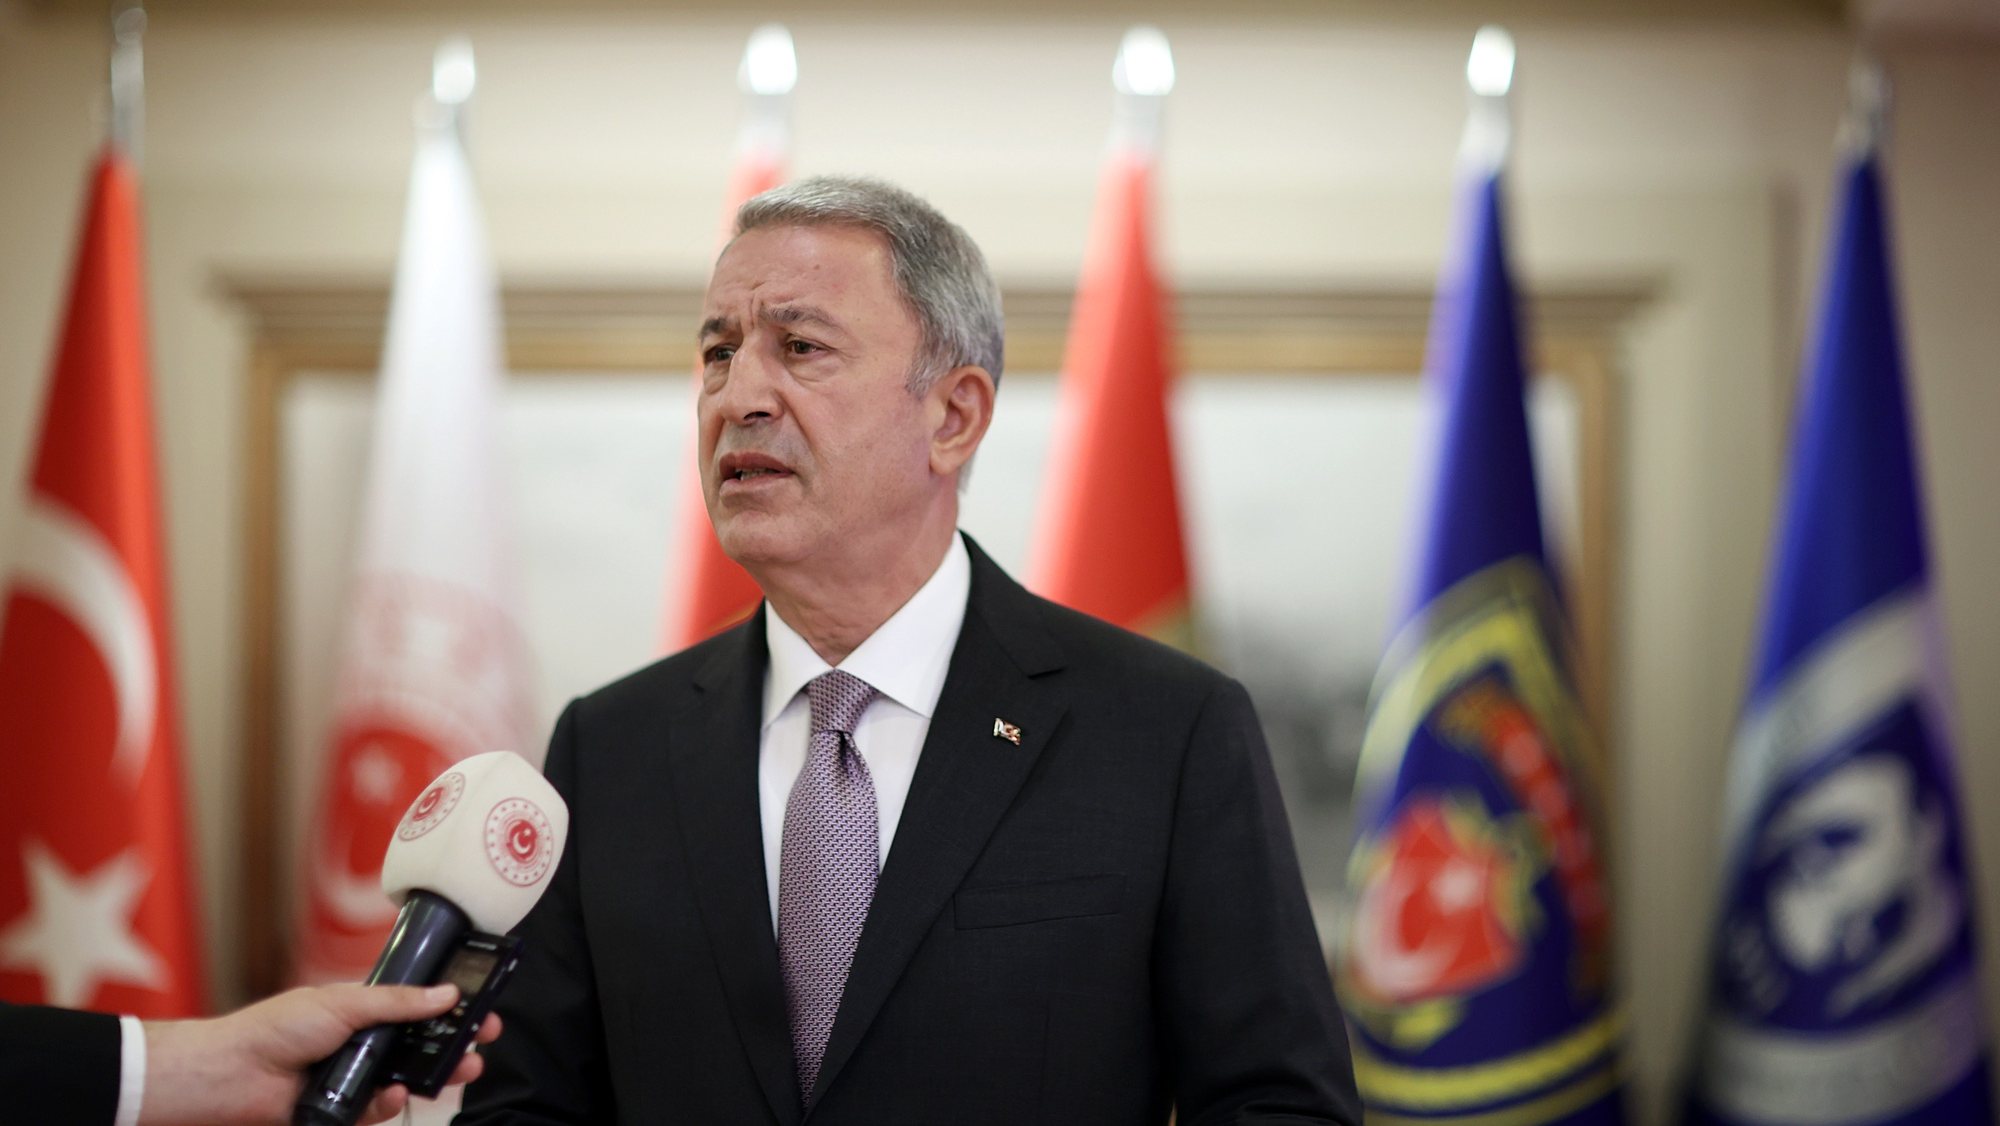 epa10069407 A handout photo made available by the Turkish Defence Ministry press office shows, Turkish Defence Minister Hulusi Akar speaks after the Turkish, Russian, Ukrainian and UN diplomats meeting for grain talks in Istanbul, Turkey, 13 July 2022.  EPA/TURKISH DEFENCE MINISTRY PRESS OFFICE / HANDOUT  HANDOUT EDITORIAL USE ONLY/NO SALES